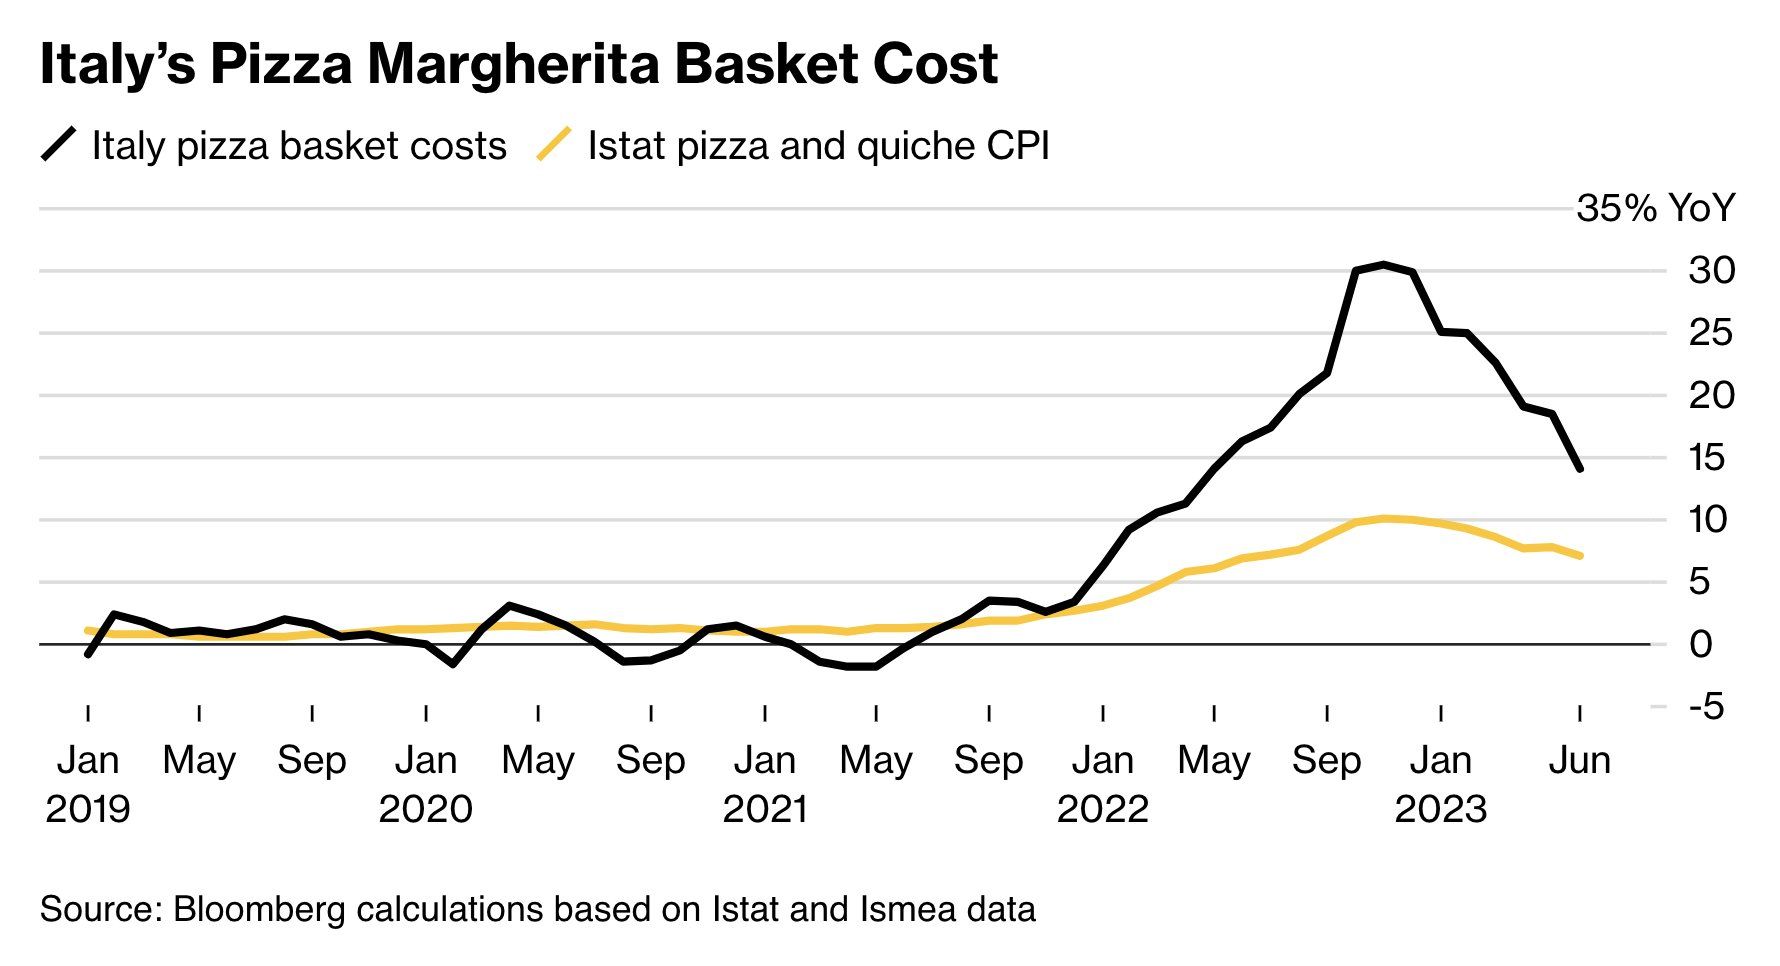 The cost of cooking a classic Pizza Margherita in Italy continues to rise as olive oil prices soar.